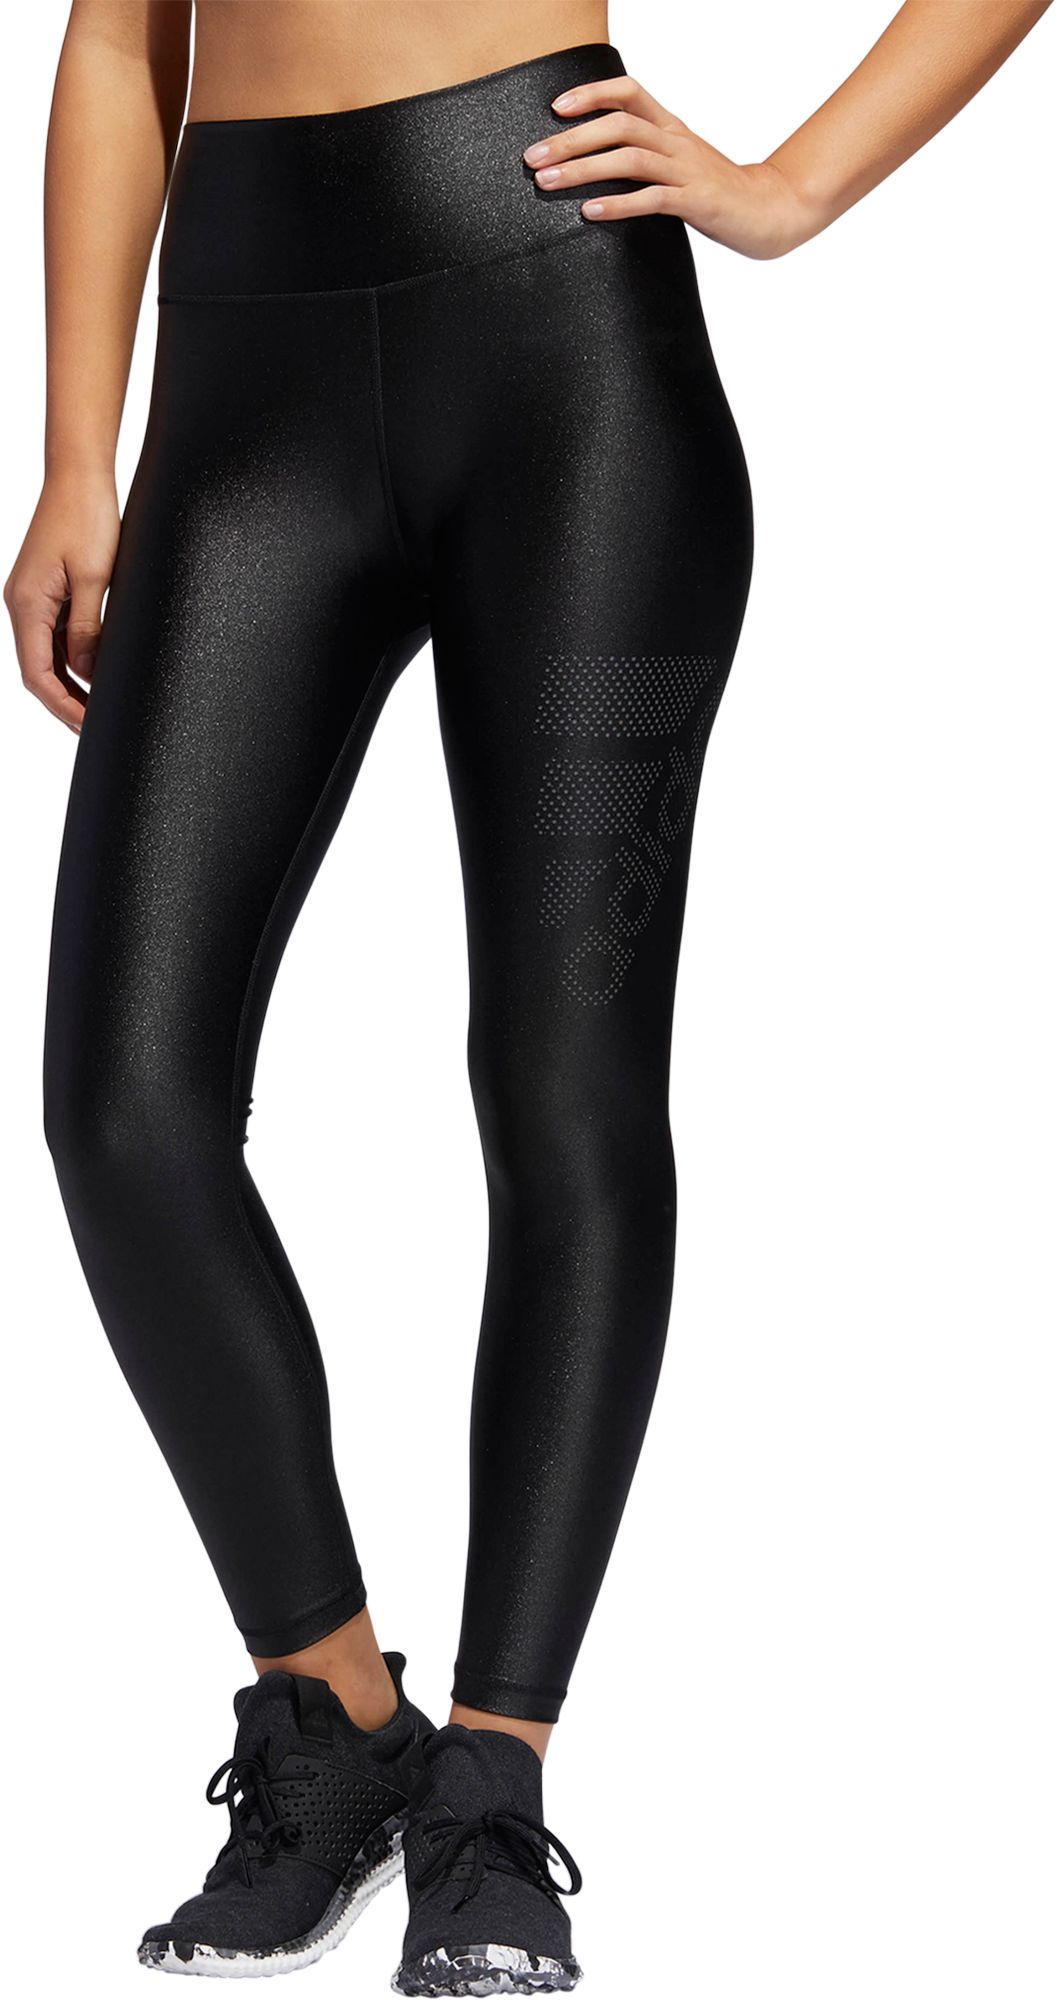 adidas Believe This Leggings | Curbside Pickup Available at DICK'S